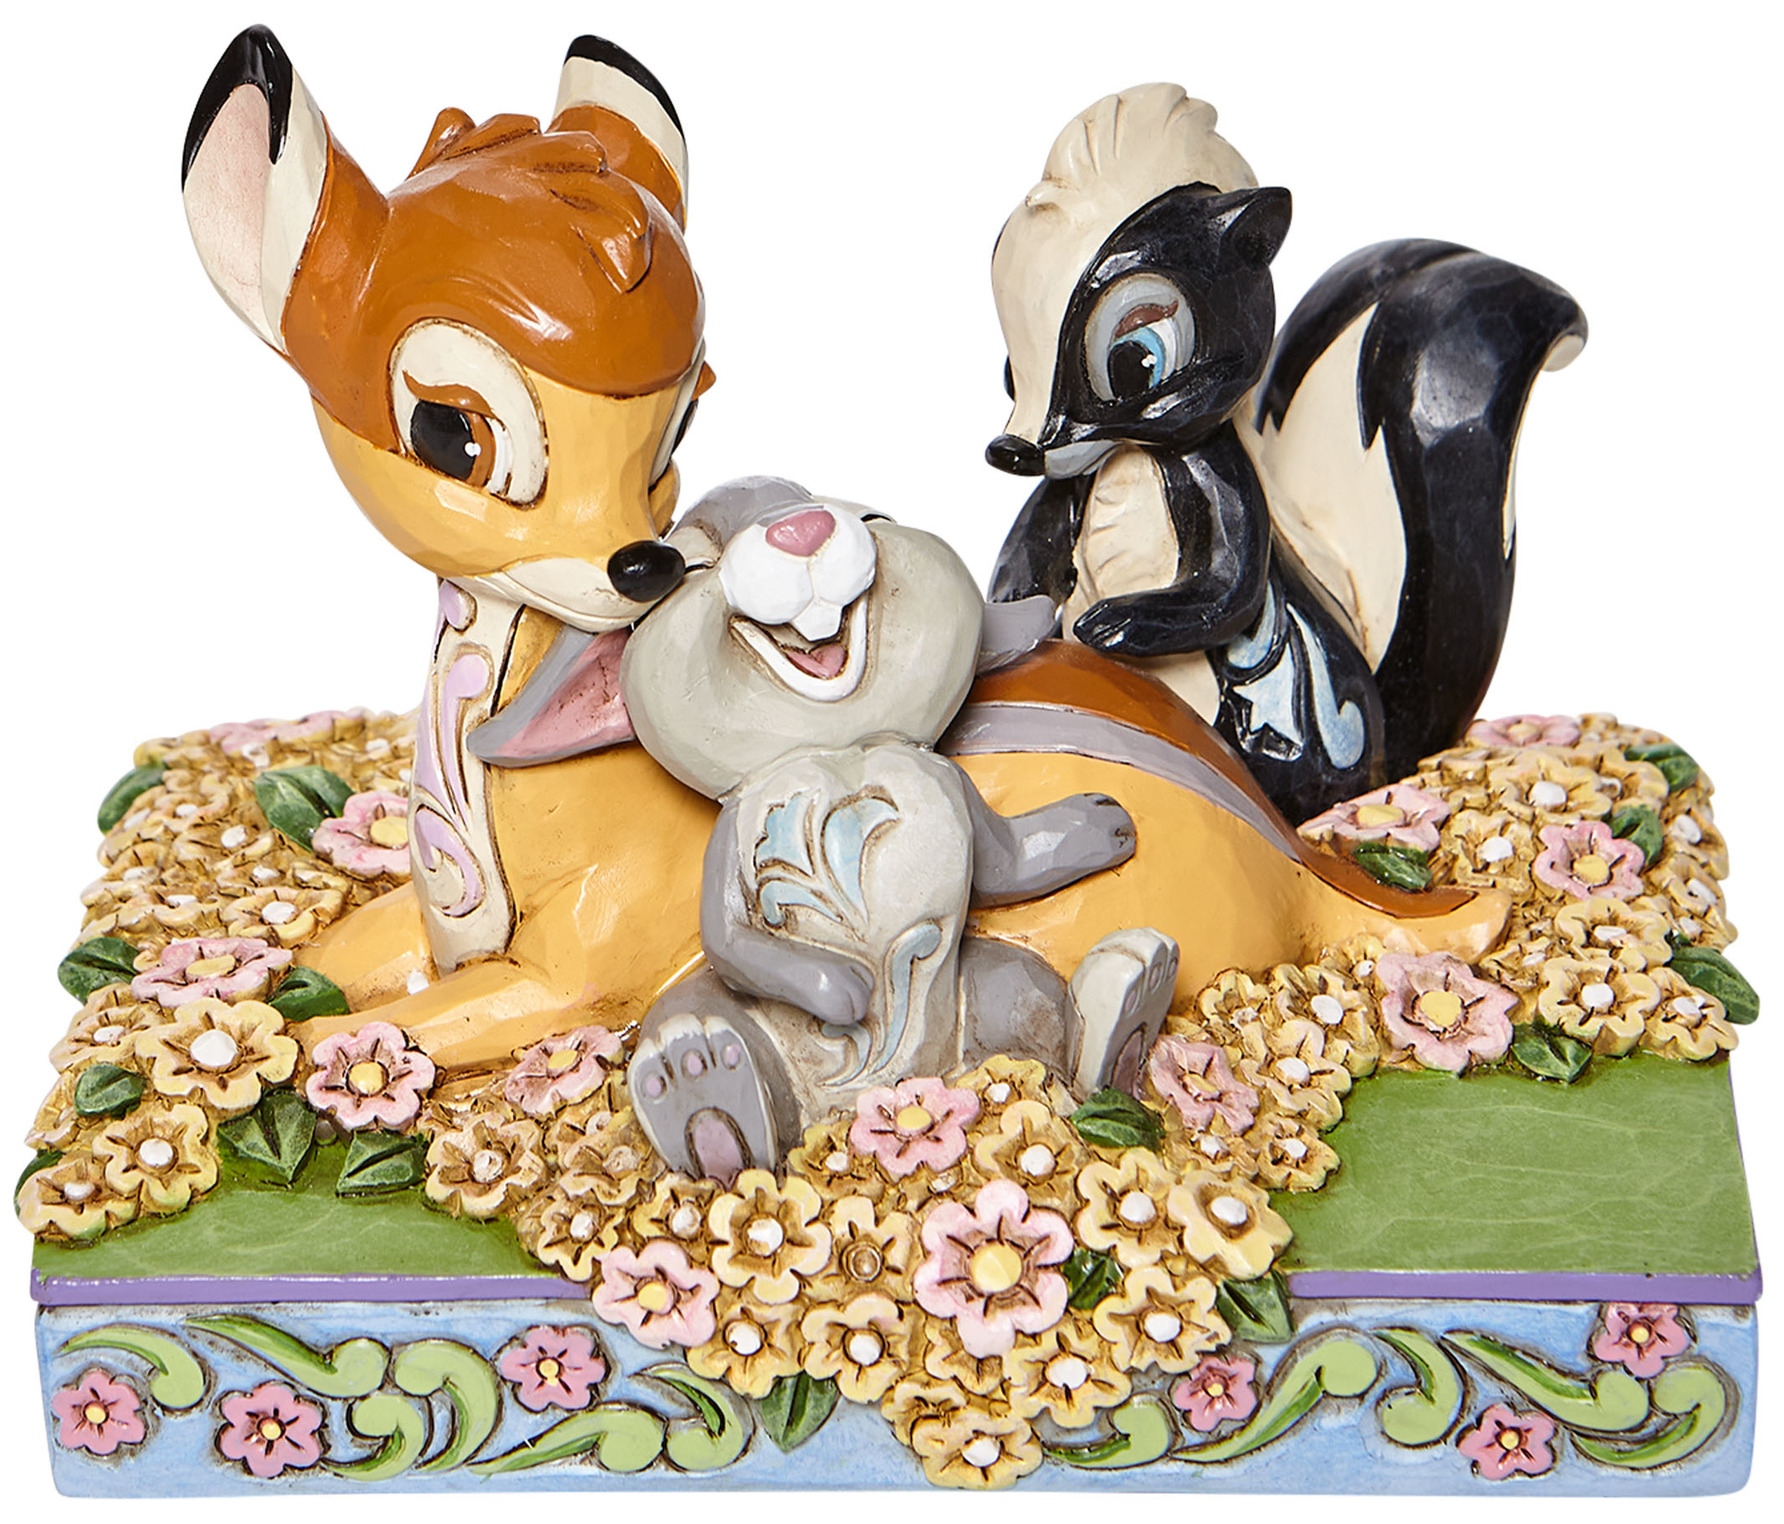 Special Sale SALE6008318 Disney Traditions by Jim Shore 6008318 Bambi Thumper and Flowers Figurine